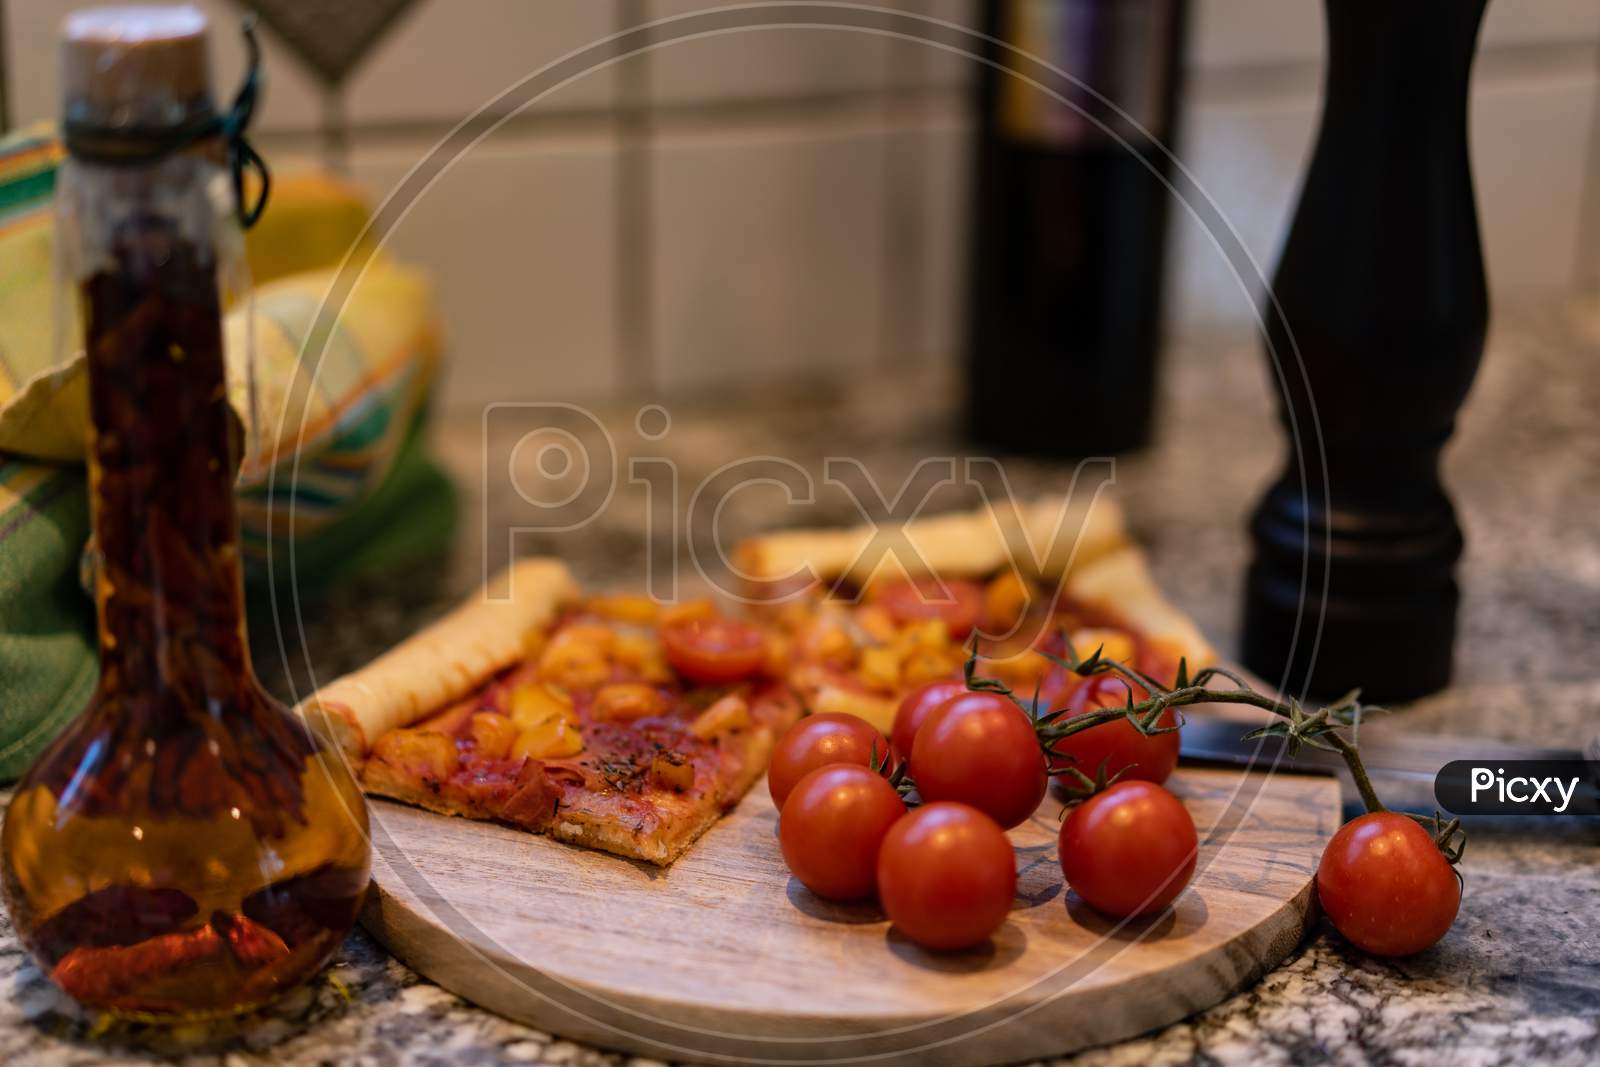 Pizza On A Cutting Board With Fresh Tomatos And Oil And Pepper Mill.